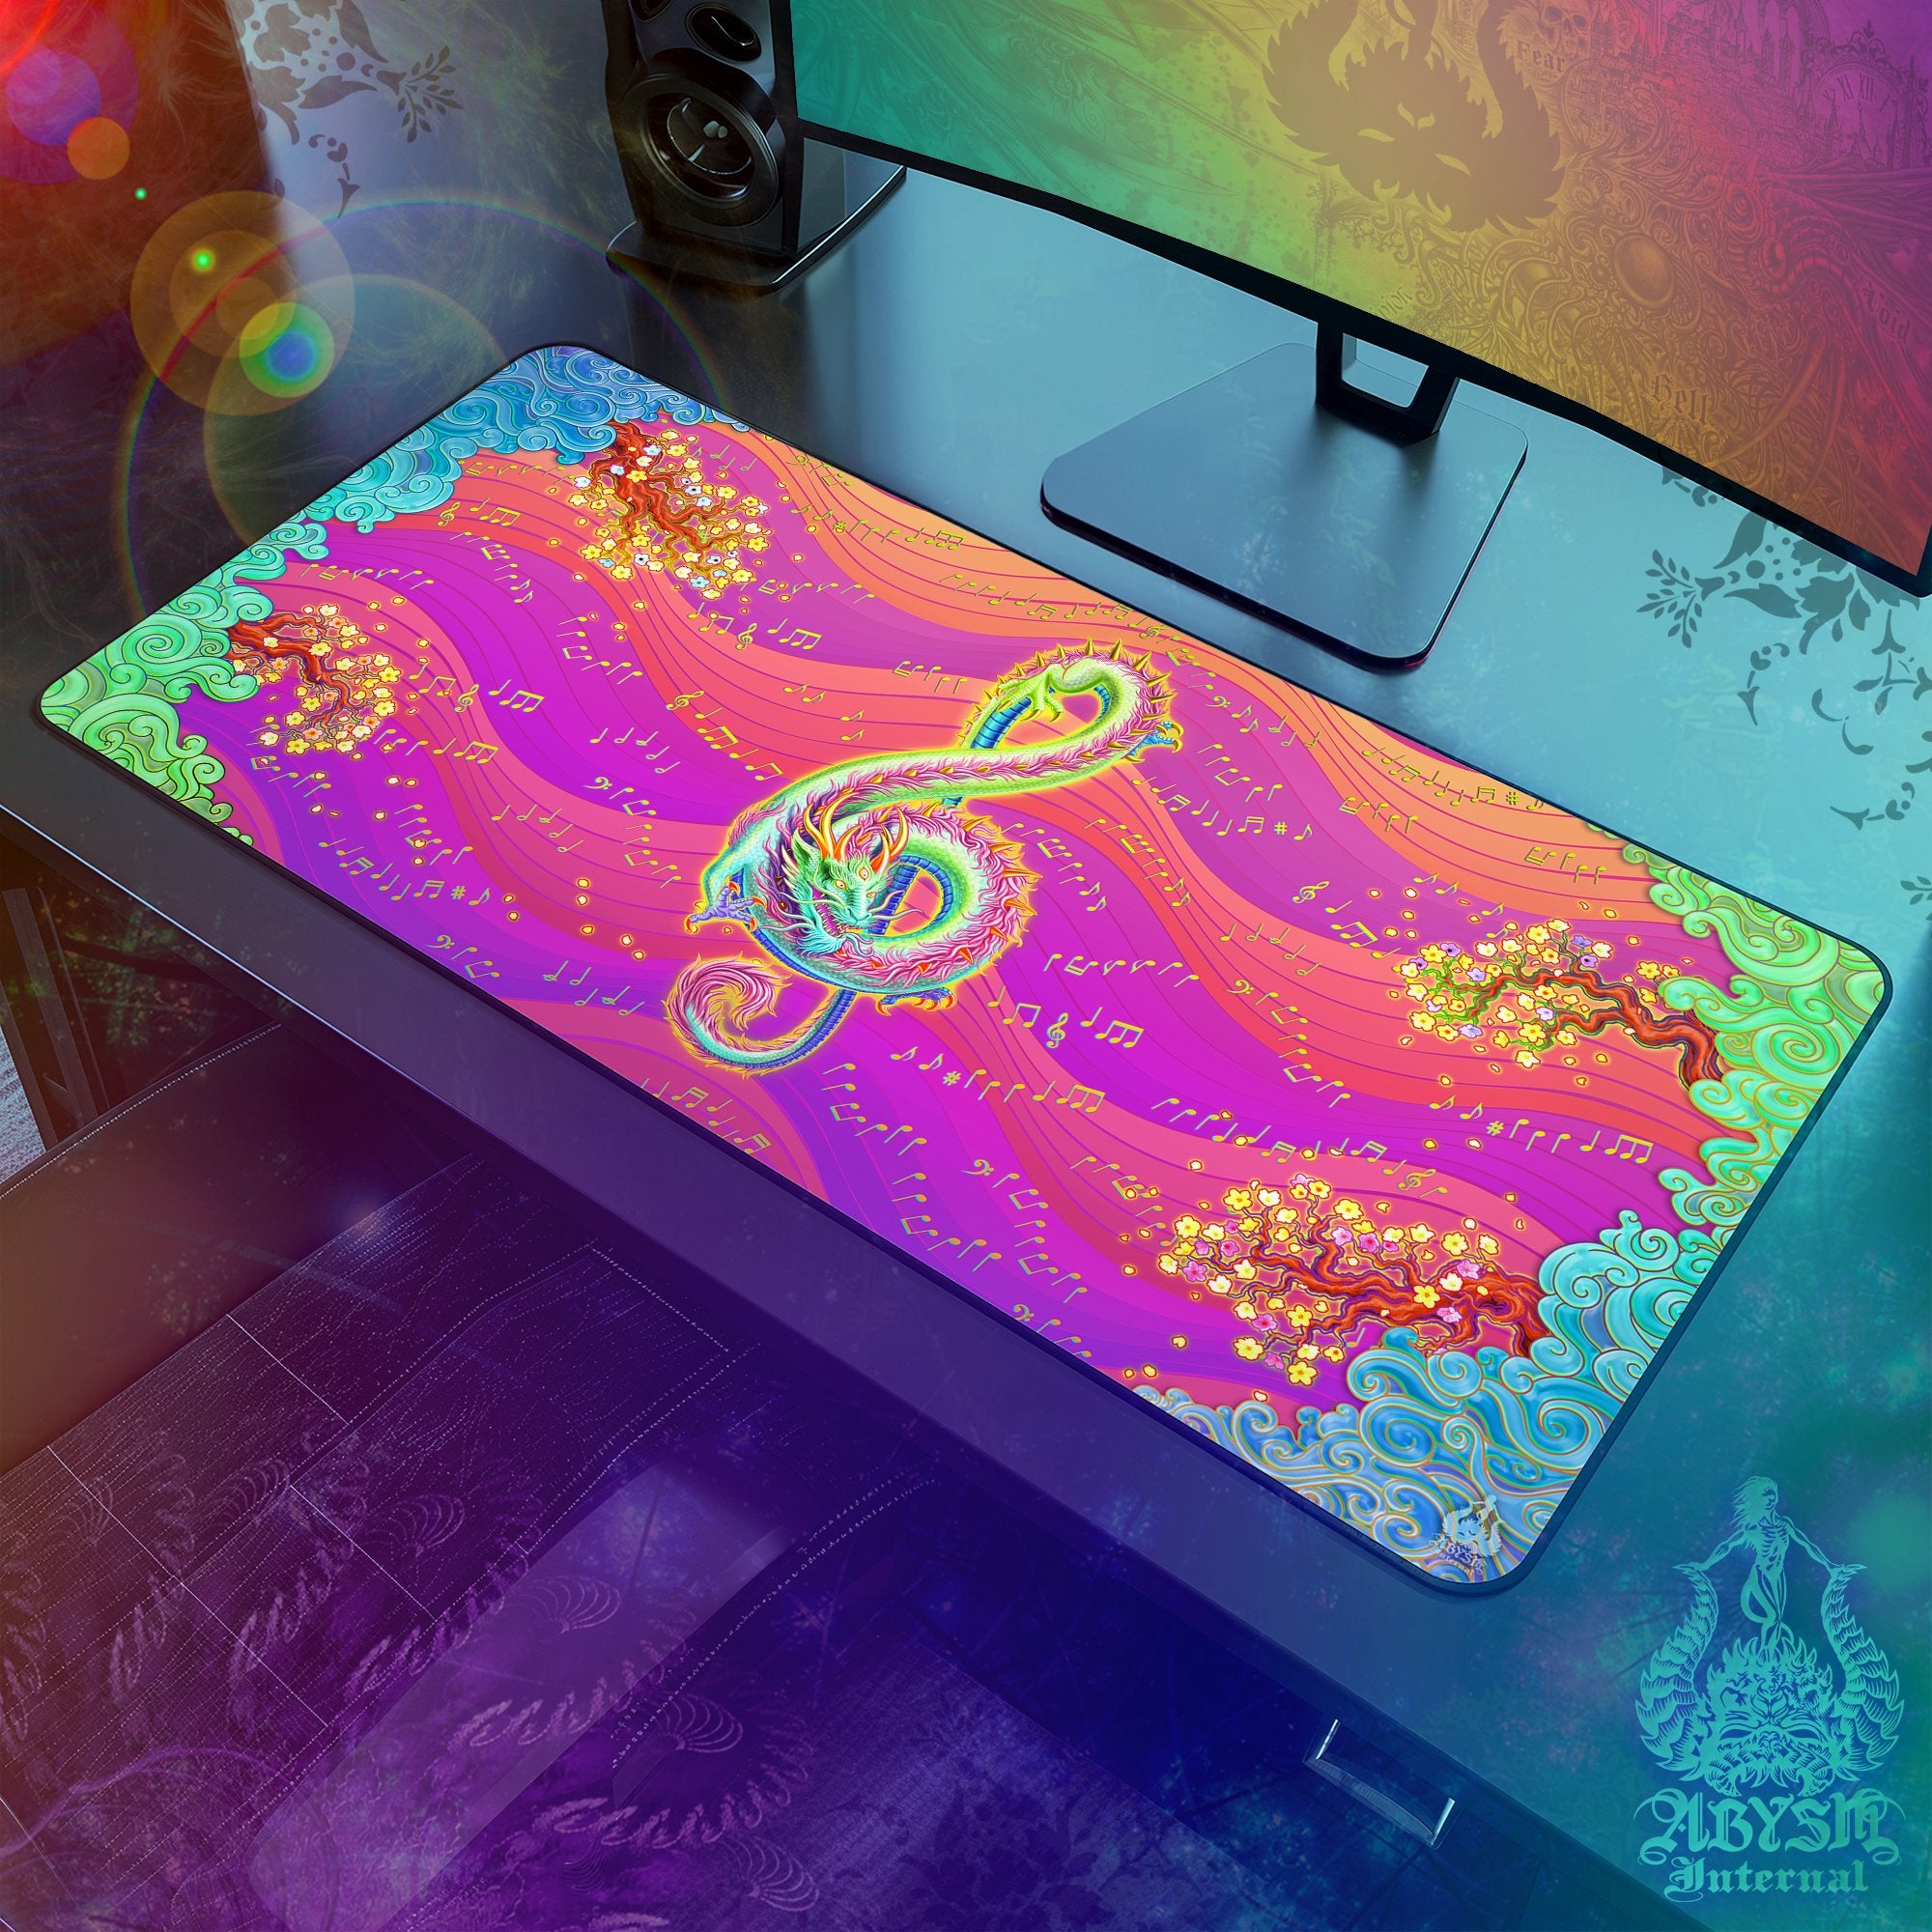 Psychedelic Dragon Desk Mat, Music Gaming Mouse Pad, Asian Table Protector Cover, Colorful Neon Workpad, Treble Clef Art Print - Abysm Internal